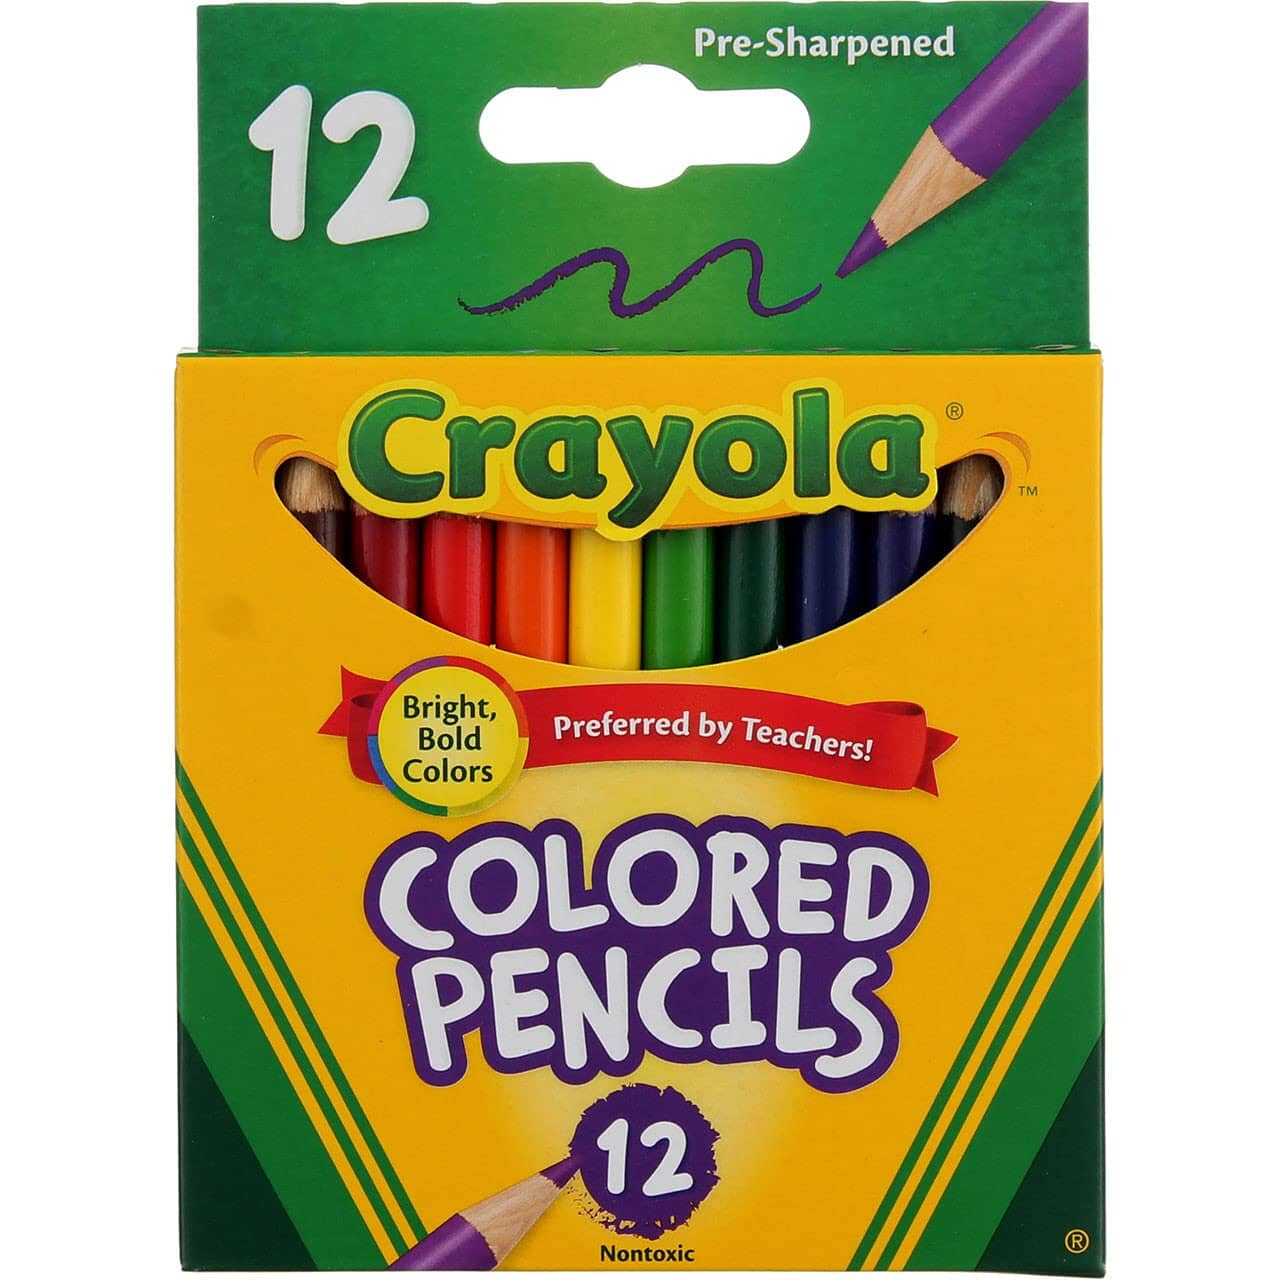 Coloring Pencils for Kids